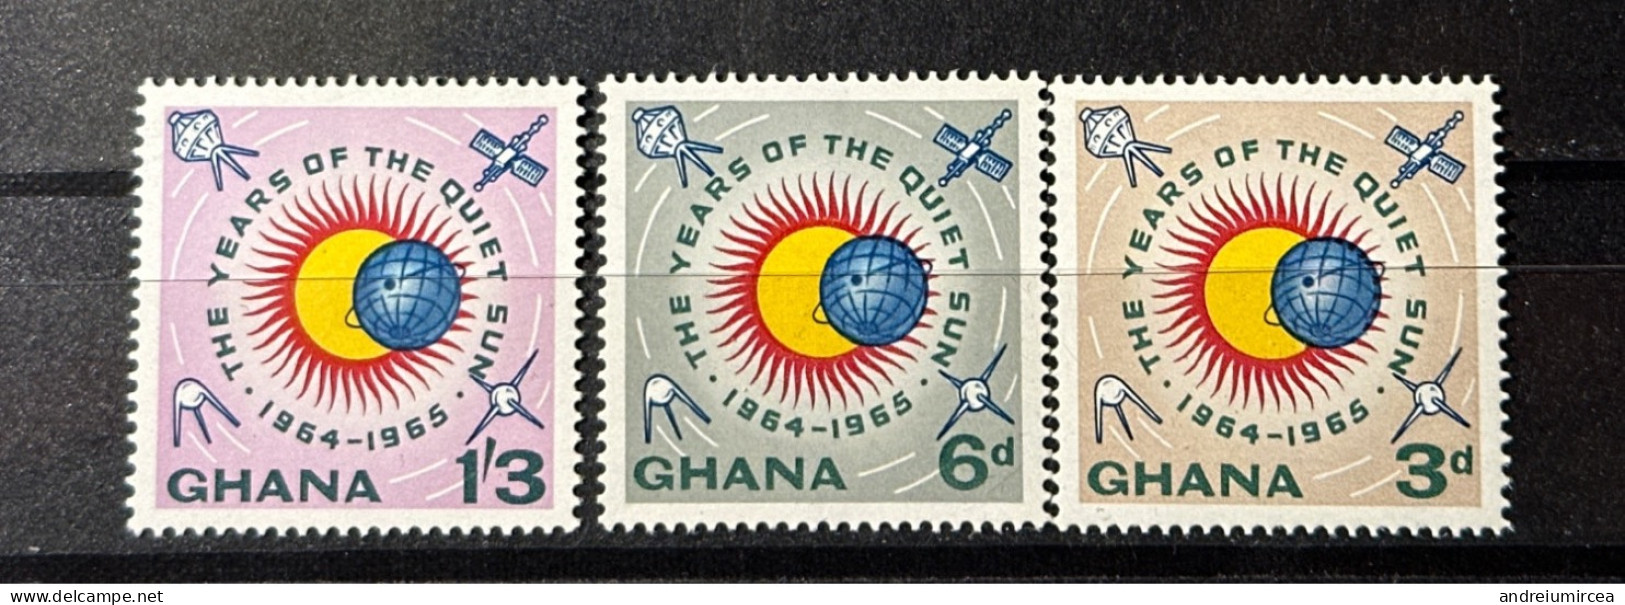 Ghana MNH  The Years Of The Quiet Sun 1964-1965 - Afrika